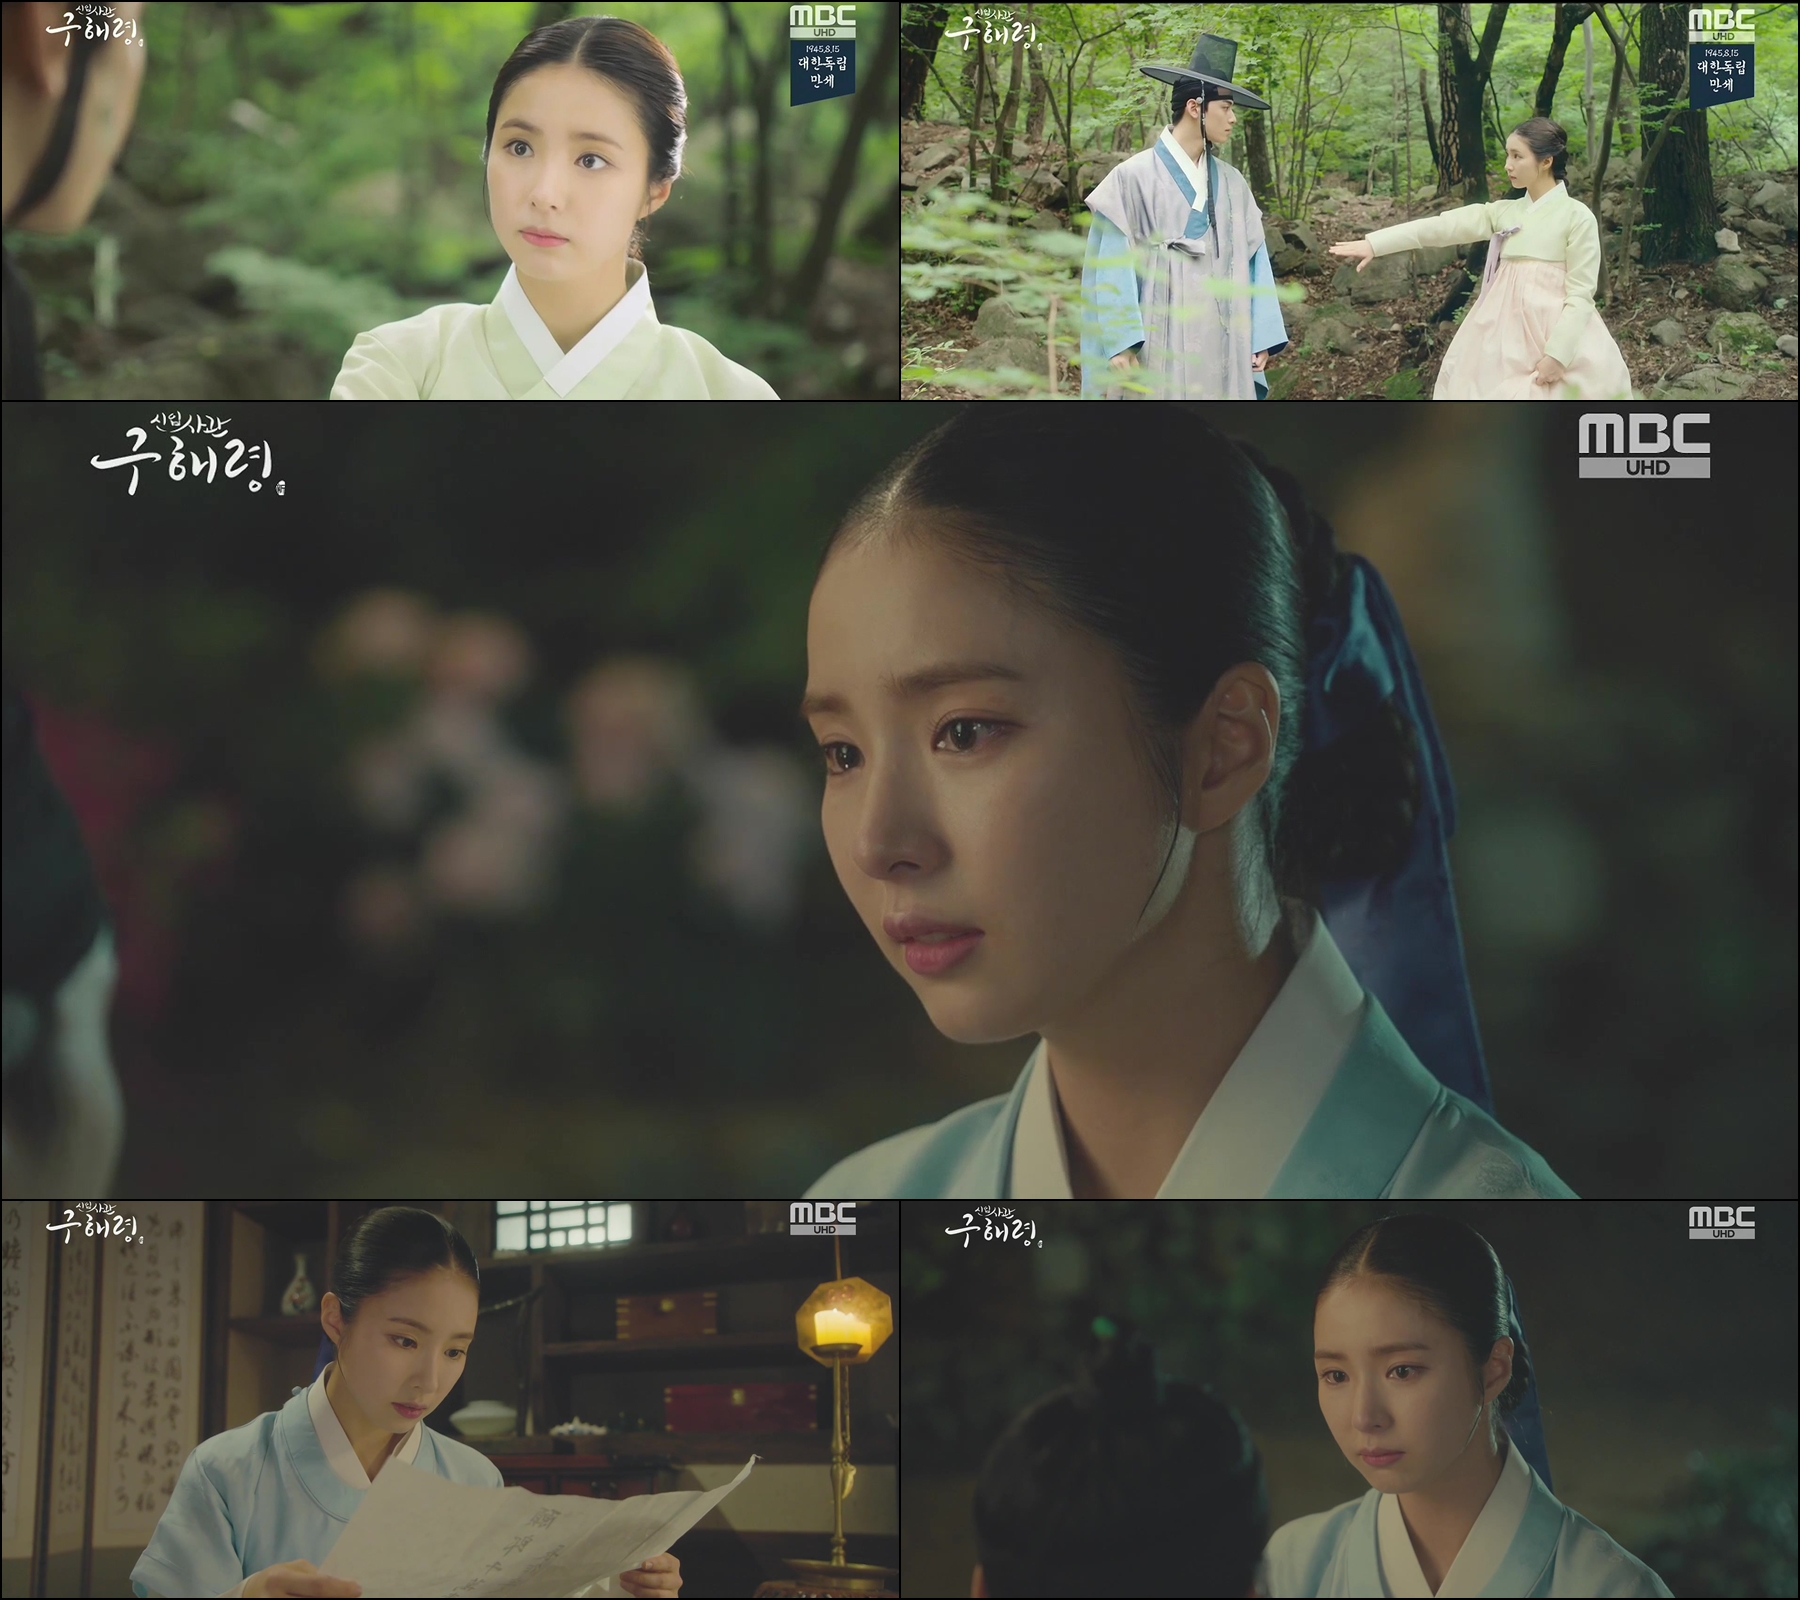 Na Hae-ryung, Shin Se-kyung, opened a new chapter in romance.Interest in actor Shin Se-kyung, who has transformed from historical drama Goddess to romance Goddess, is hot.Currently, he is in control of the MBC drama Na Hae-ryung as the main character.One of the factors that can keep the box office lead is Shin Se-kyungs brilliant performance.It shows the smoke inside which has been firmly made through many works without regret and makes viewers immerse.Especially, Shin Se-kyung, who has freely traveled between the drama, comic and romance, has received many favorable comments.Among them, the Shin Se-kyung Romance, which doubled the romance of late summer in the drama, attracts attention.From the romance of the mill to the romance of the sweetest who does not go easily to the next story.I will again look at the Shin Se-kyung Romance, which has created such a pleasant trembling.# 1. Stop cheating! Tough taxman who announced the prelude to romance! _ 17 & 18 timesNa Hae-ryung, the first lady of the Joseon Dynasty, was a person with a genuineness.Therefore, it is always Na Hae-ryung who is honest with my Feeling, but it is an exception to Lee Rim (Cha Eun-woo).Na Hae-ryung was heartbroken by his confession Dont get away from me: tough (?) to sort out dizzy thoughts.The figure of taxing was the one that showed that Feeling, which treats Lee Rim, was different from before.Na Hae-ryung, who fired a signal of interactive romance, made the story even more exciting.# 2. Automatic ascension of clowns! Hands held with a different meaning! _19&20 timesNa Hae-ryung, who came down the mountain road with Lee Lim, was a woman who fell in love.I could not take my eyes off Irim, who took the light joke that the tiger was coming out seriously, and I could not stop the smile that leaked out without knowing it.The proposal of Na Hae-ryung served as an important occasion for the distance between the two to get closer.Na Hae-ryungs lovely push and pull that she had taken Irims hand for another reason, not to chase fear, made viewers fluctuate to the hearts of the audience.# 3. It is more intense because it is sad! The first kiss of Haerim left a deep heart _ 23 & 24 timesNa Hae-ryung happened to see a poem written by Irim in the melted-down party, I want to live my love for a long time, and be my master forever.Na Hae-ryungs eyes were moist and wet as he faced the leeching with a surging heart.Then Na Hae-ryung kissed Irim sweetly but fondly, and their hearts were truly in touch, and it gave many an unforgettable afterthought.Shin Se-kyung said, After I learned the mind of Lee Rim, I wanted to express the process of realizing my own mind and conveying my mind well. Na Hae-ryungs Feeling line is not clearer than Lee Rim, so I tried to melt the mind that has a little tension and a heart that loves Lee Rim into Sinab. He said.Shin Se-kyung, who is putting the number of house theaters in such a sweet romance, is expected to continue the romance of Shin Se-kyung.Shin Se-kyungs MBC Na Hae-ryung will be broadcast every Wednesday and Thursday at 8:55 pm.iMBC  Photos